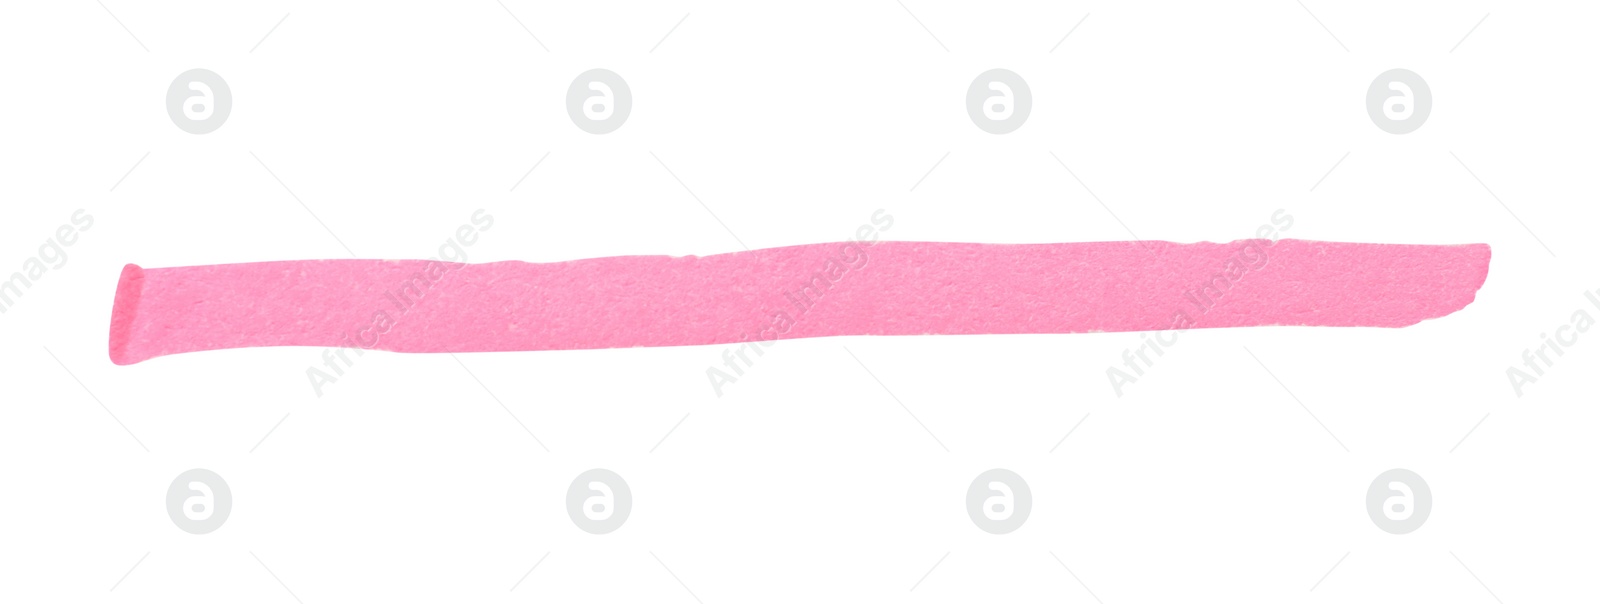 Photo of Strip drawn with pink marker on white background, top view